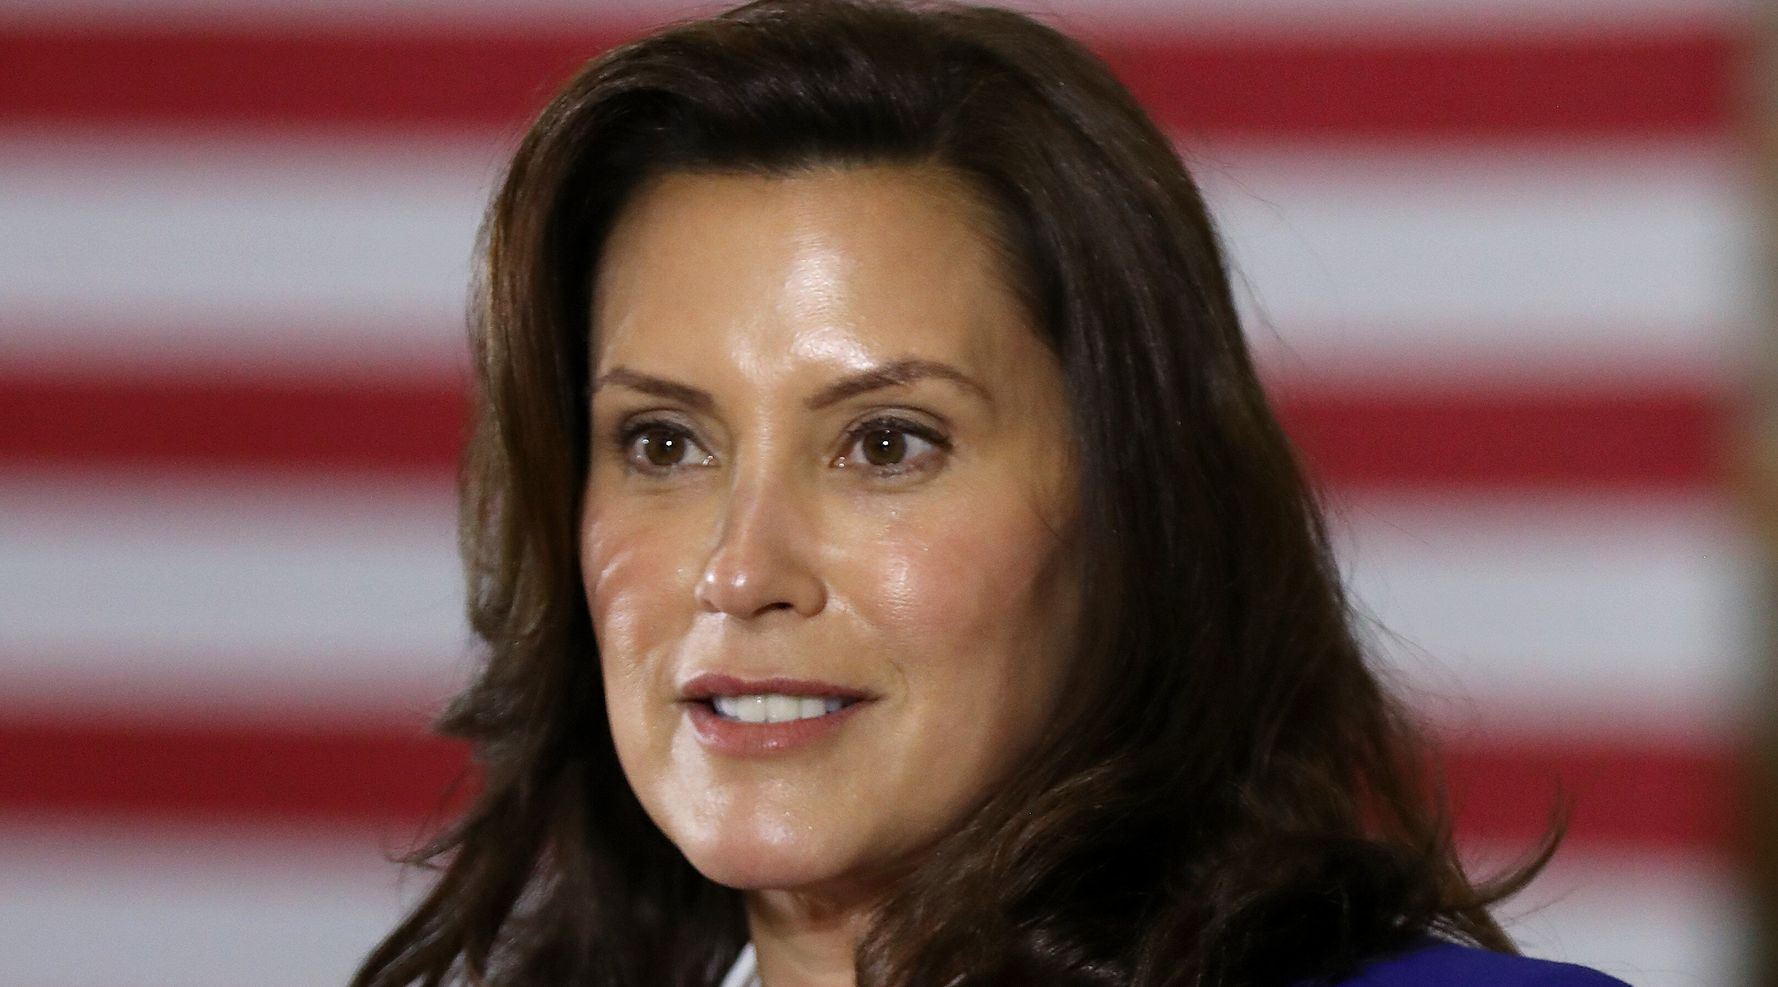 Michigan Man Faces Jail Time Over Threats To Gov. Gretchen Whitmer